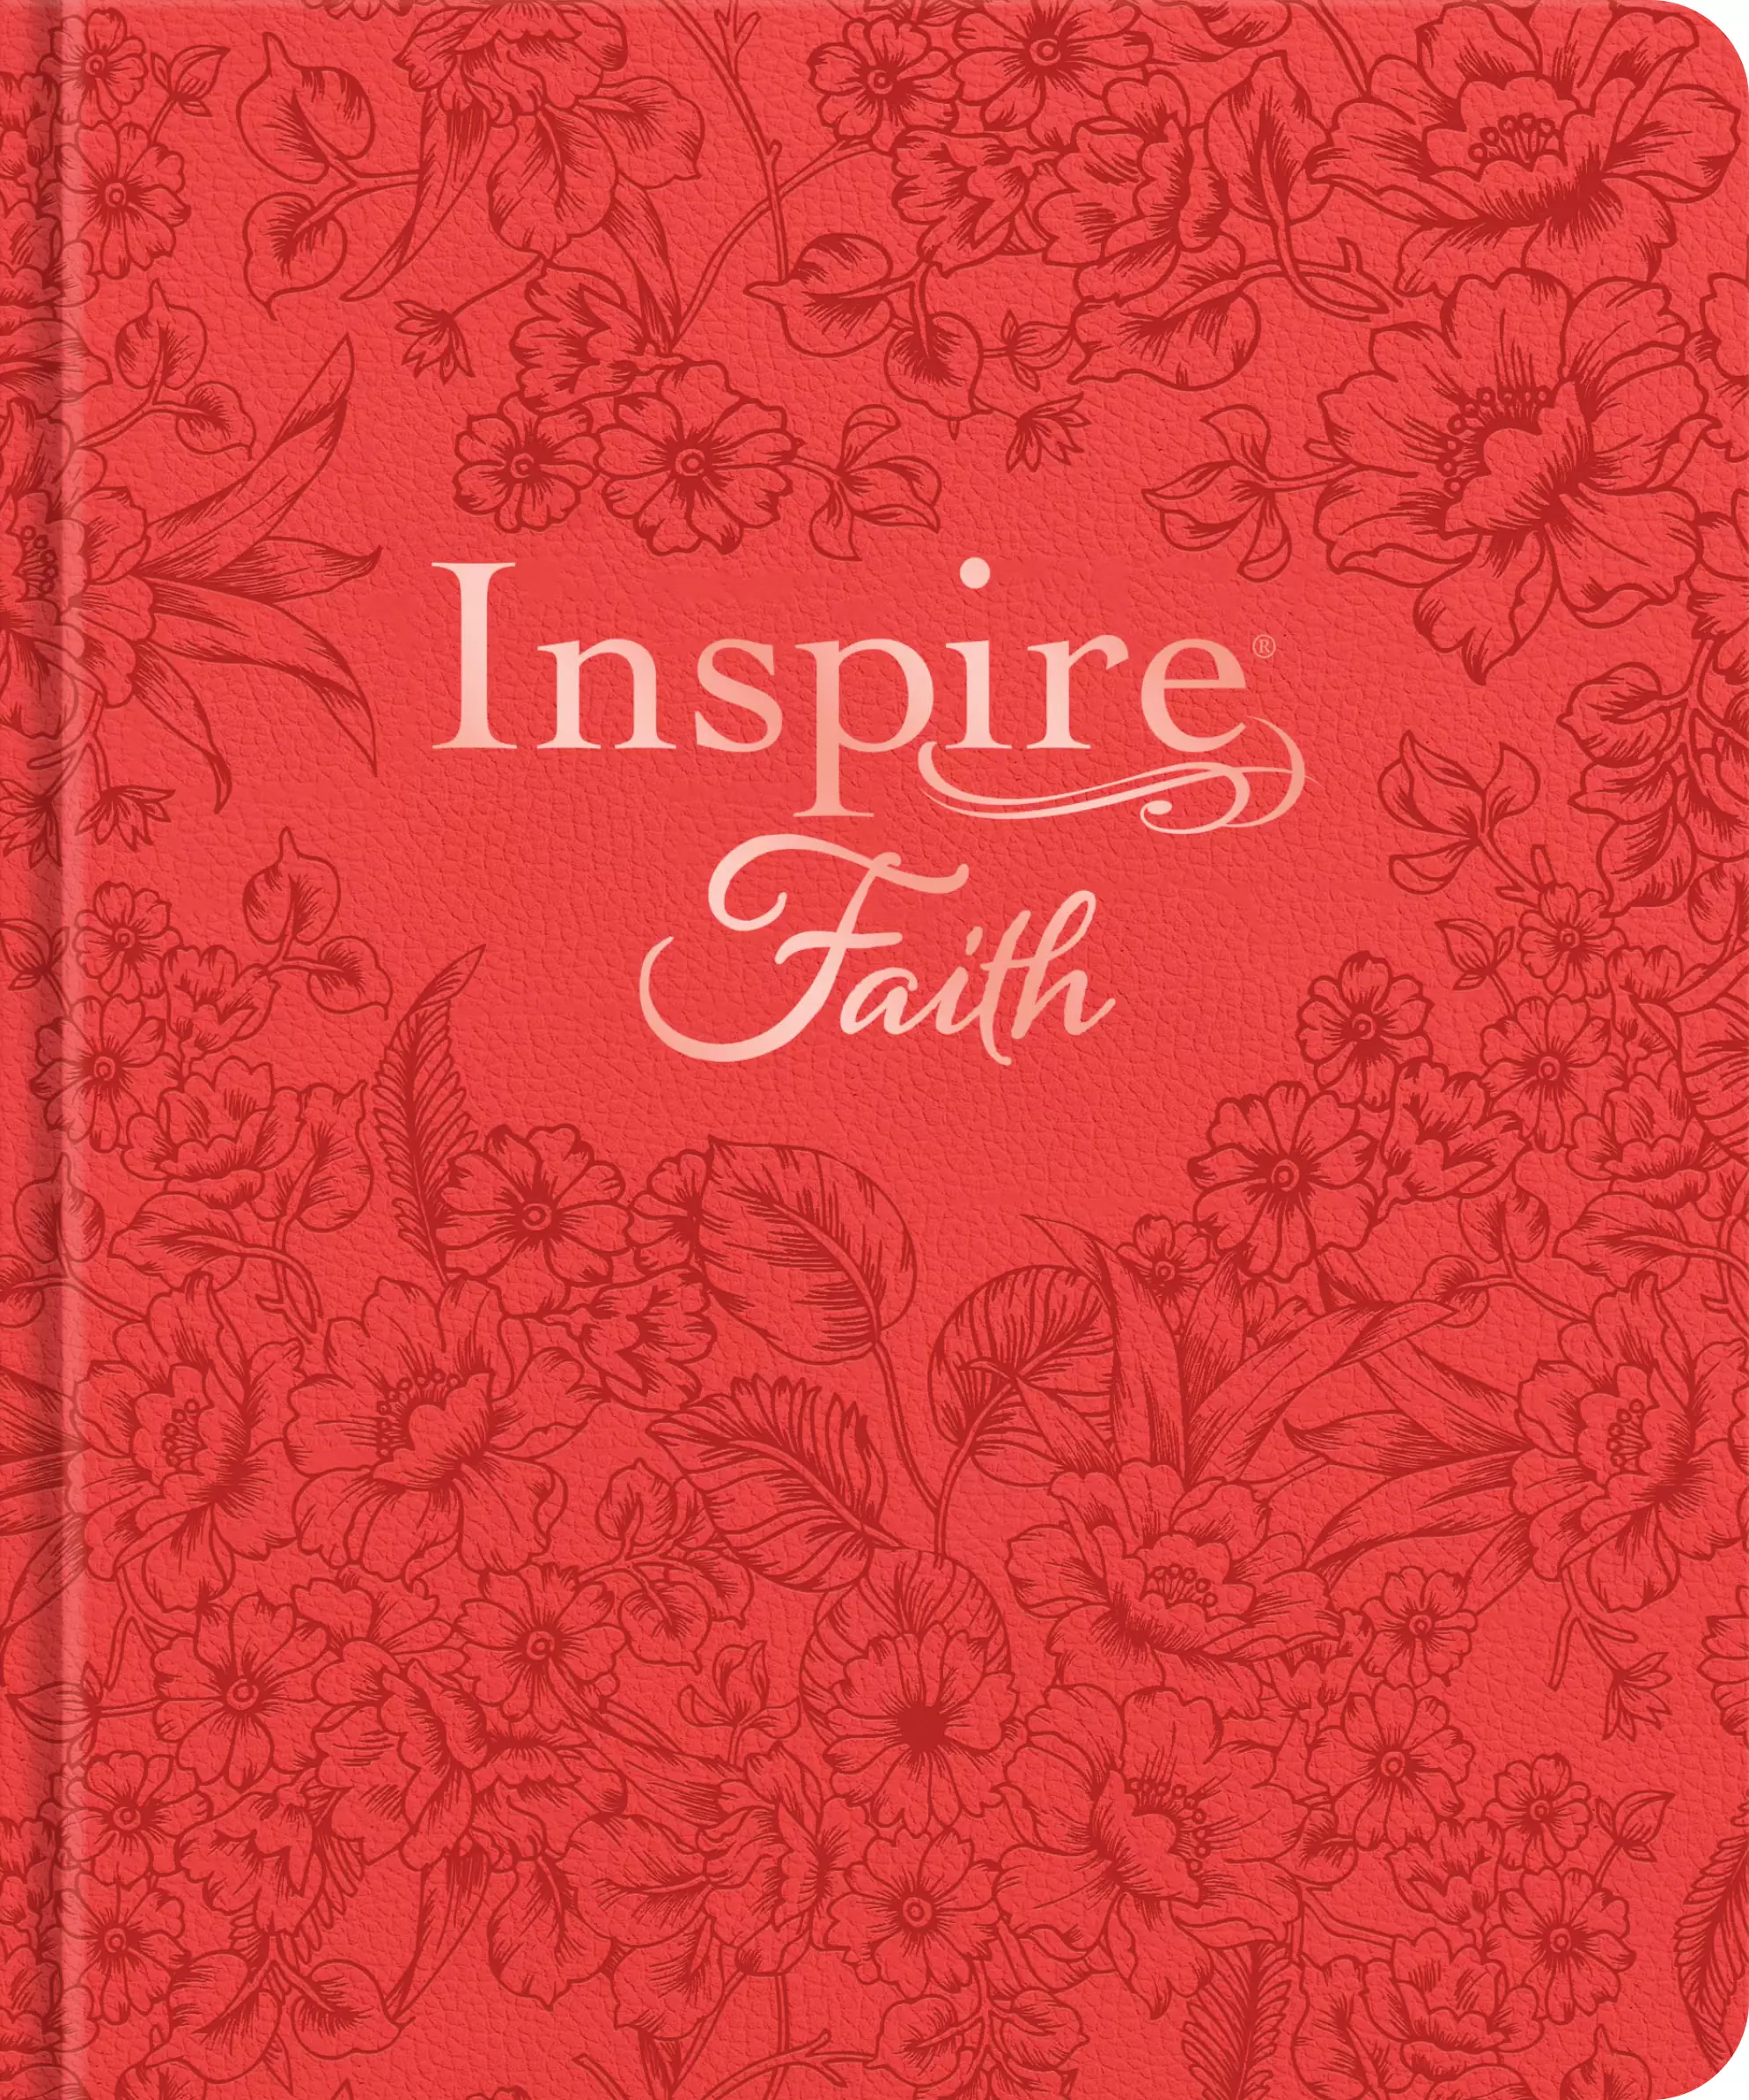 Inspire FAITH Bible NLT (Hardcover LeatherLike, Coral Blooms, Filament Enabled)